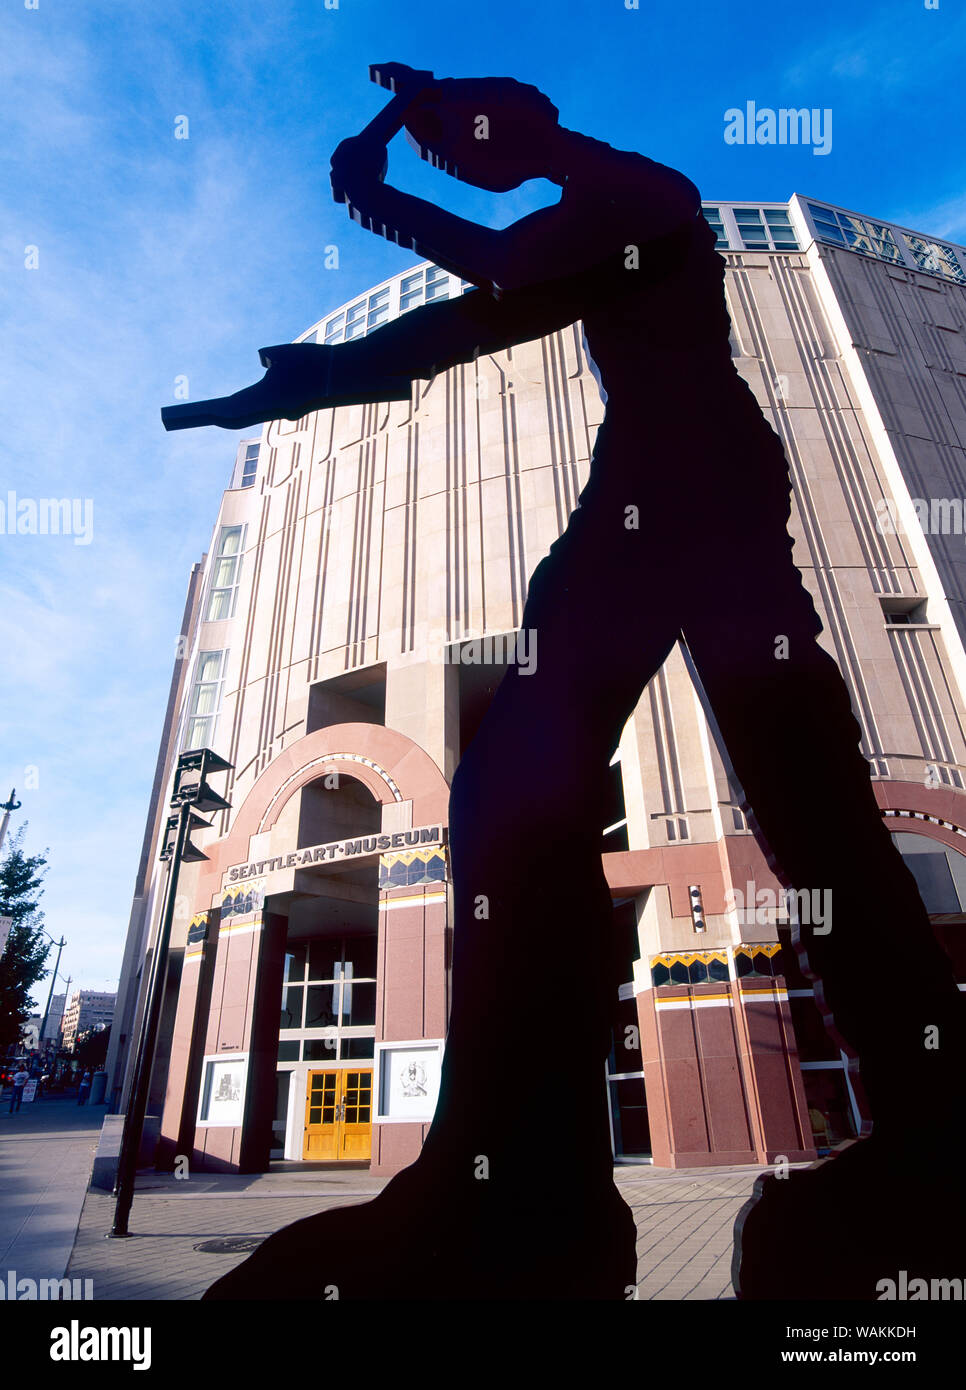 Hammering Man kinetic sculpture by Jonathan Borofsky, installed 1991 outside Seattle Art Museum, Seattle, Washington State. (Editorial Use Only) (Editorial Use Only) Stock Photo